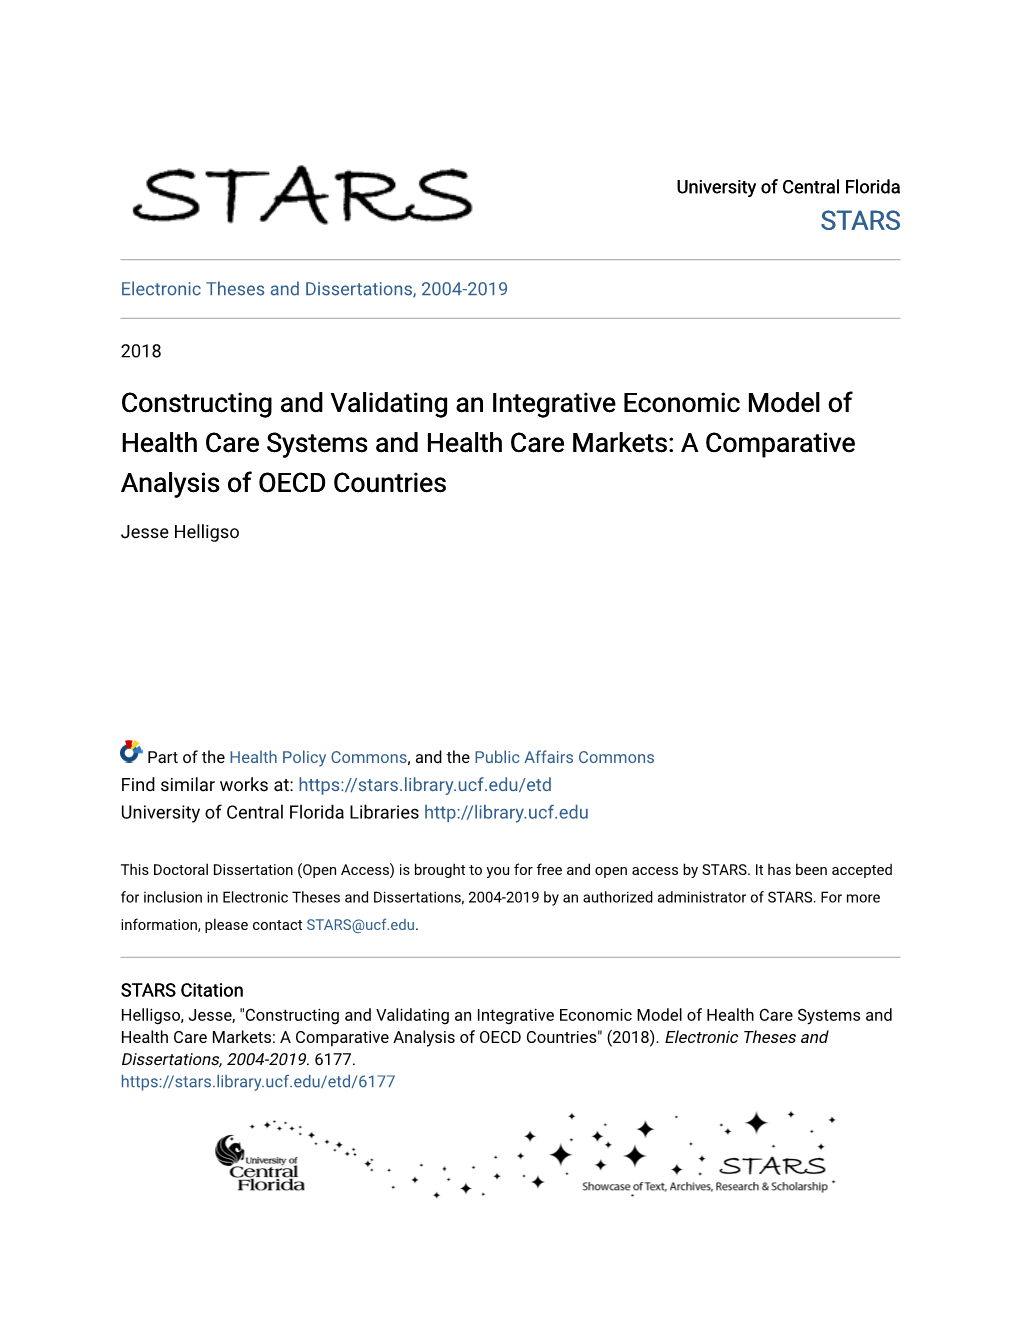 Constructing and Validating an Integrative Economic Model of Health Care Systems and Health Care Markets: a Comparative Analysis of OECD Countries